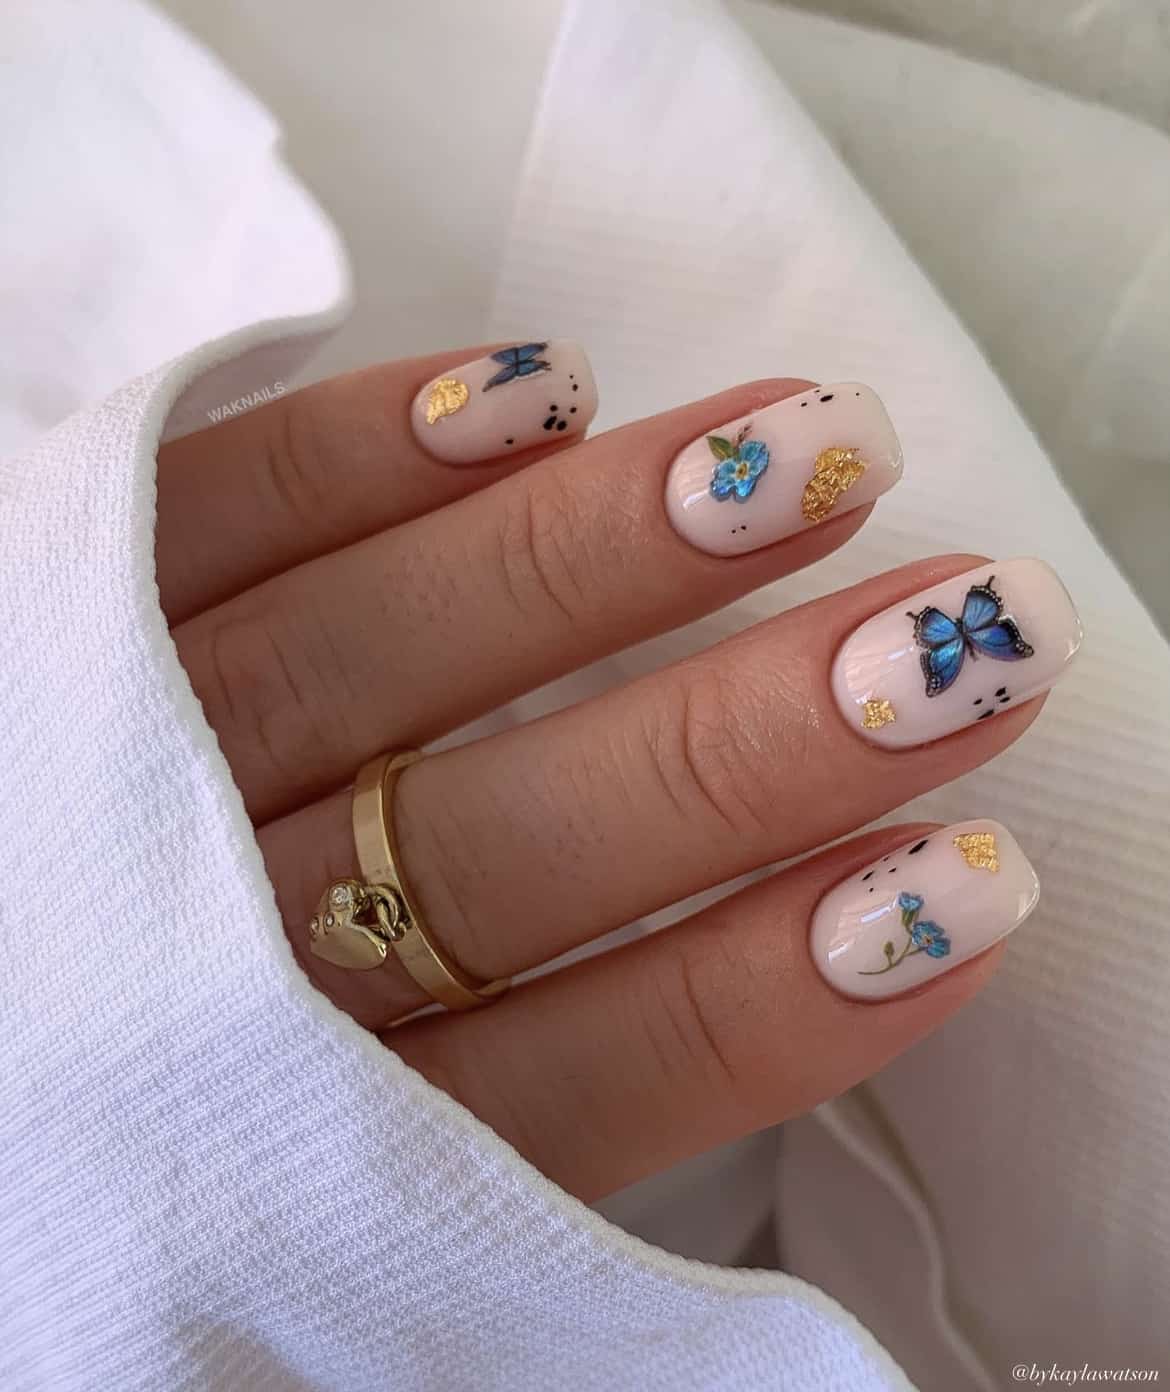 A hand with short squoval nails painted a milky white color and accented with gold flakes, blue butterflies, and blue flowers